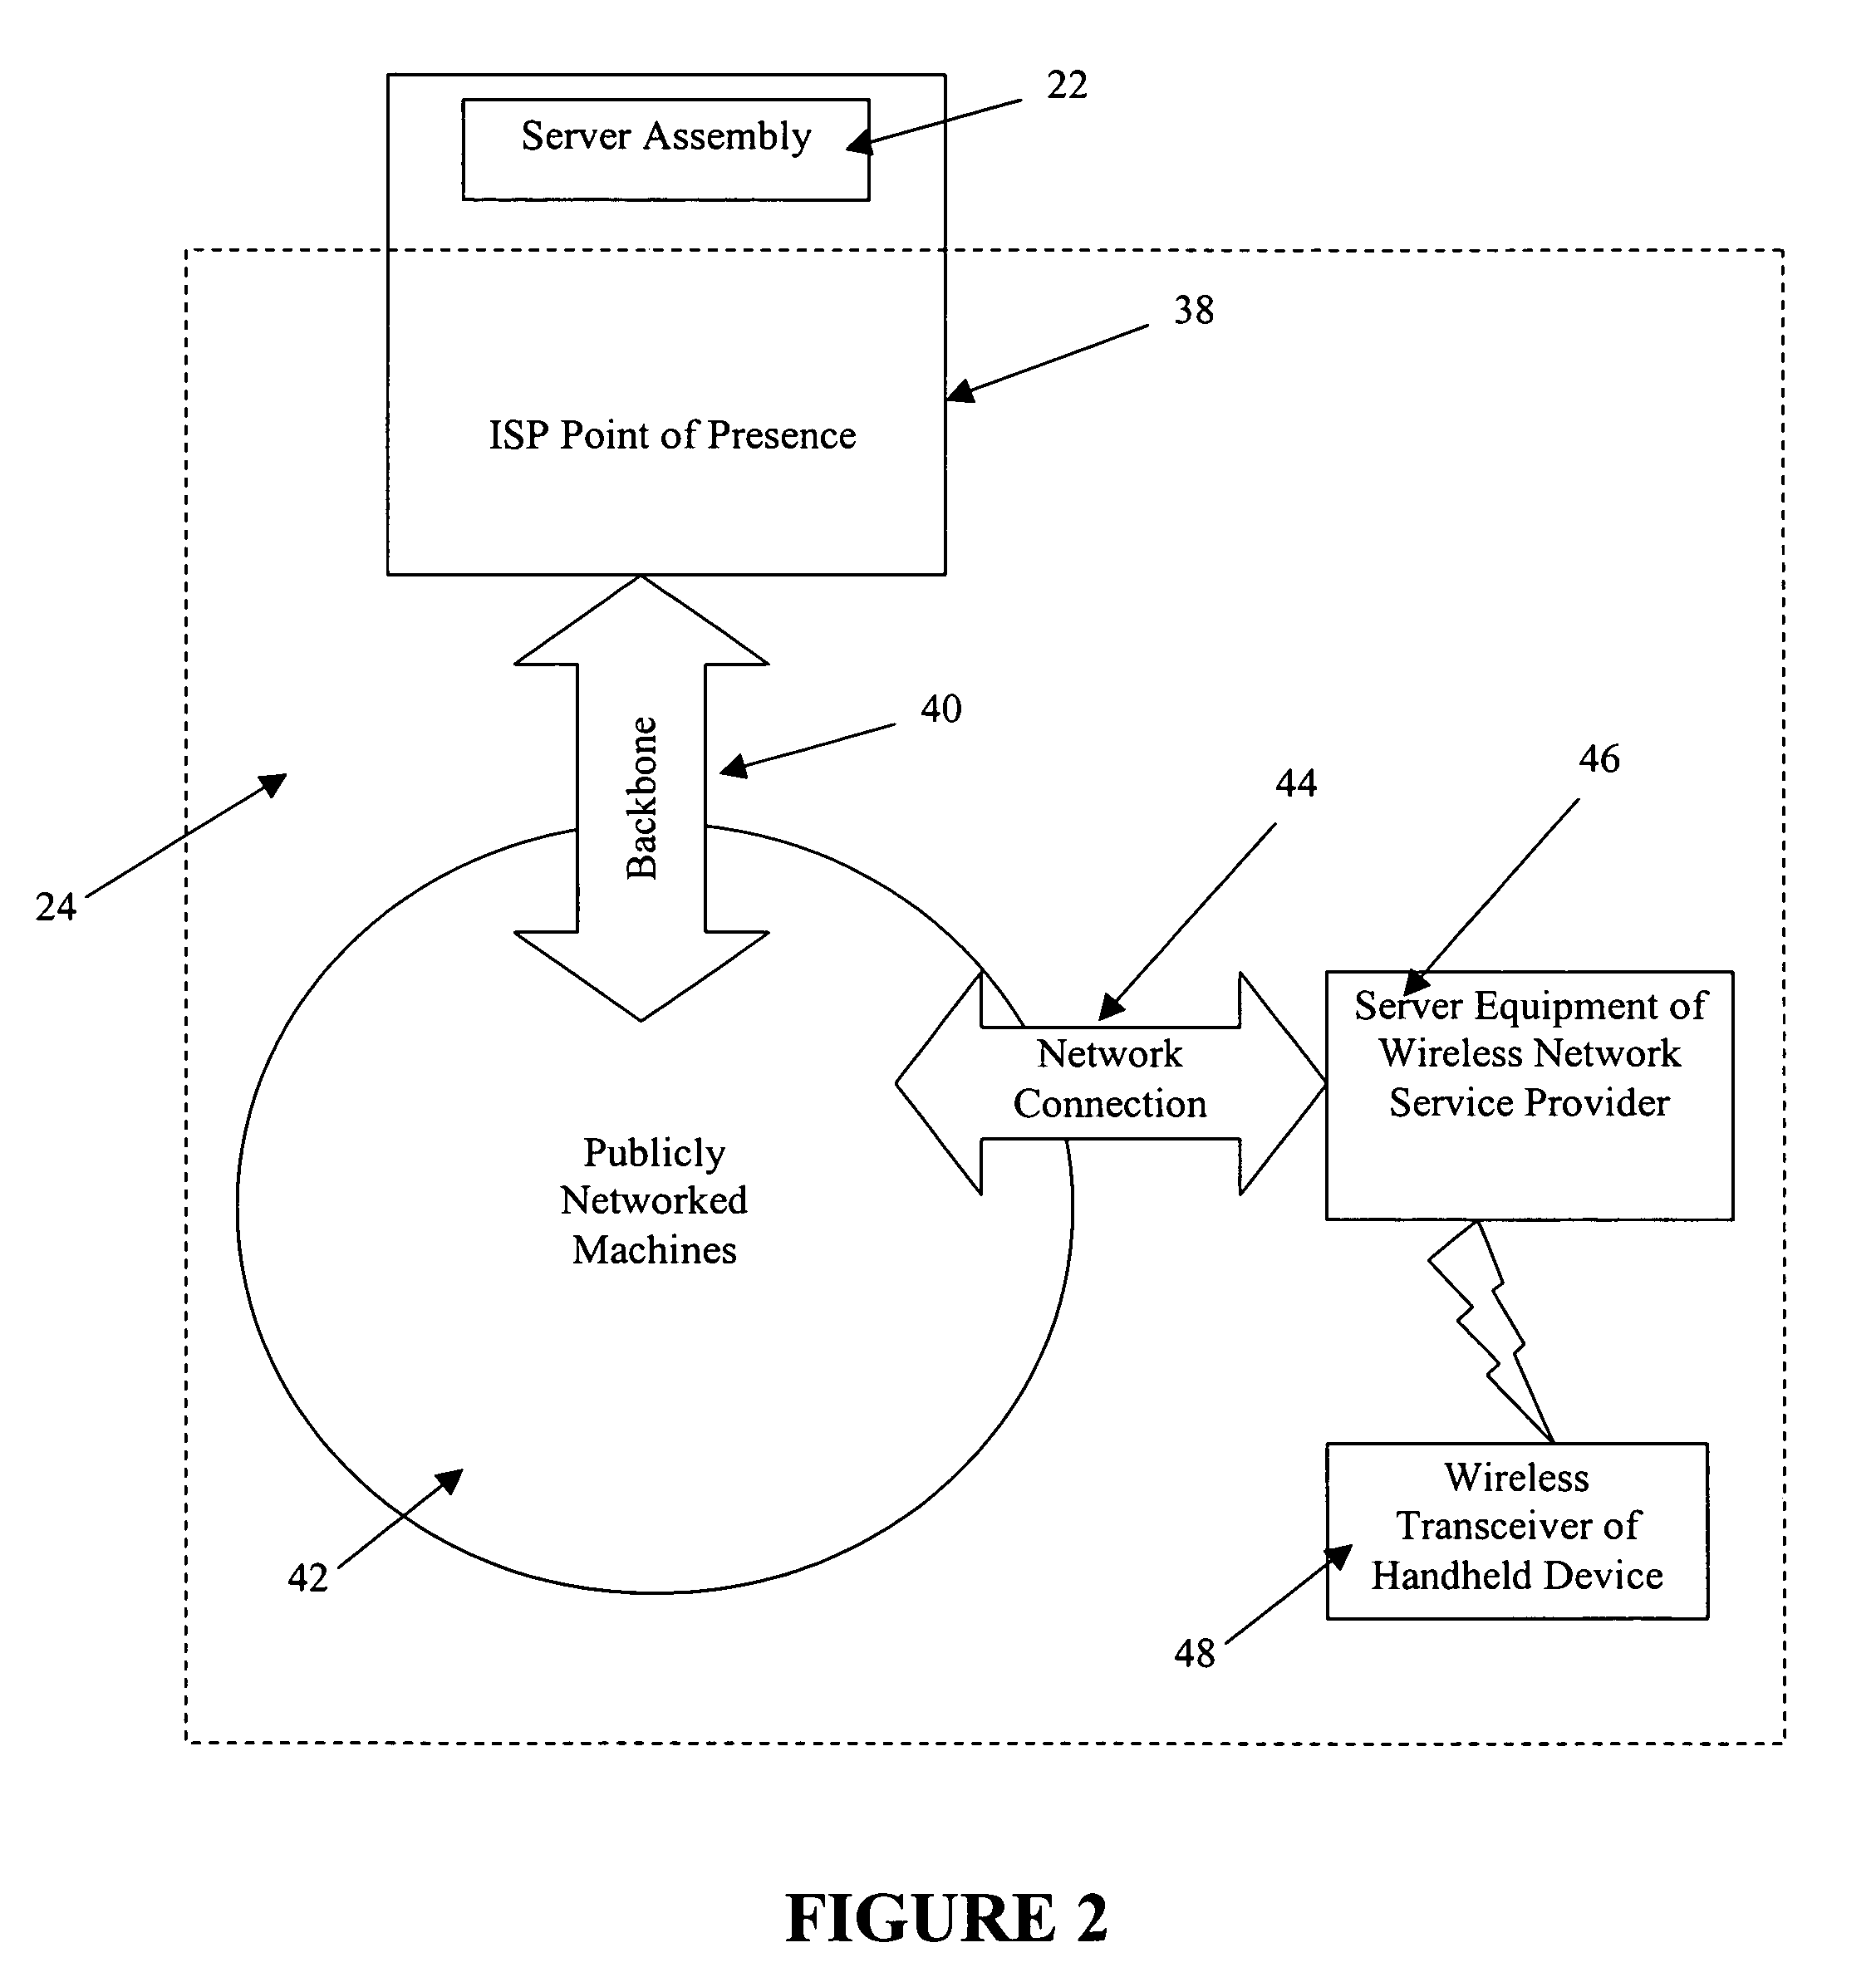 System and method for providing location-based and time-based information to a user of a handheld device